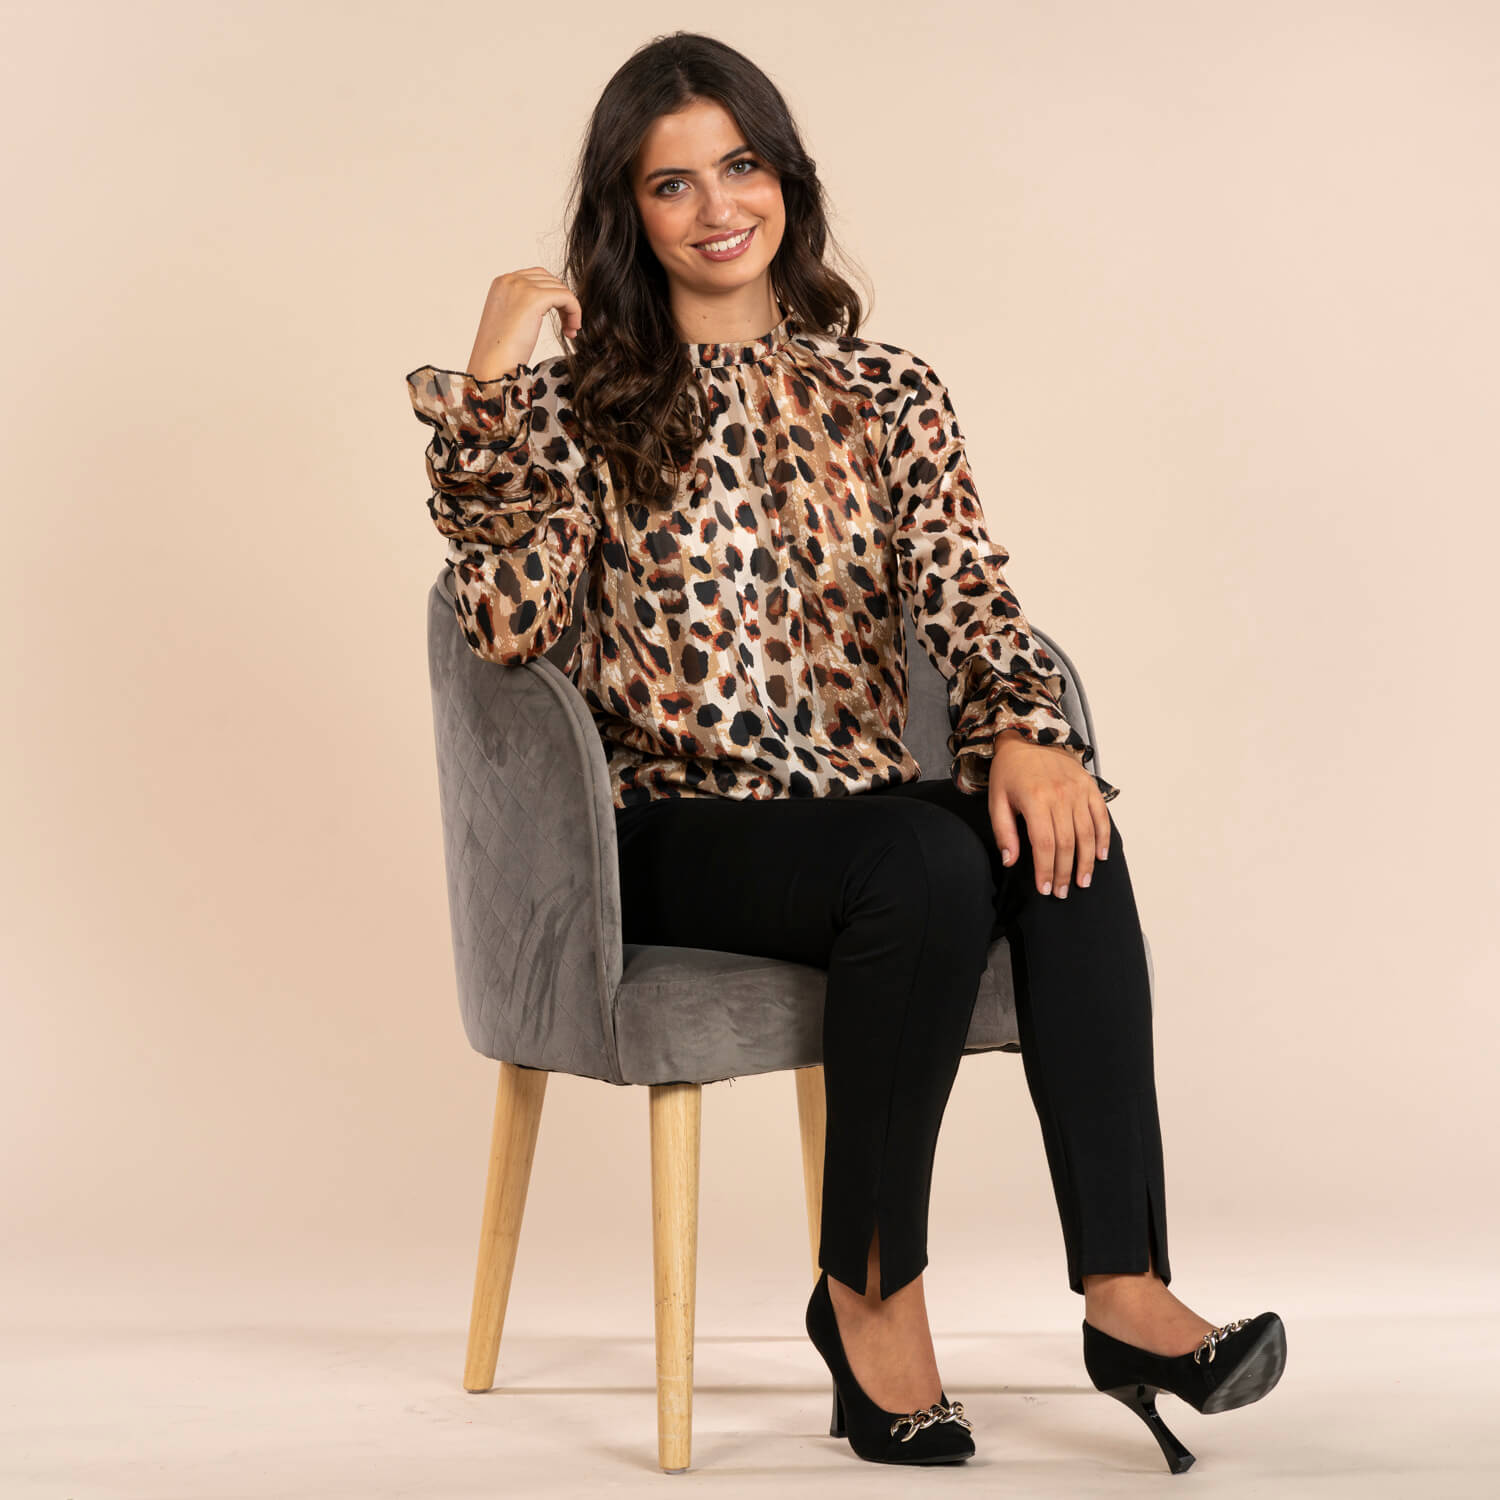 Naoise Flare Cuff Blouse - Taupe Leopard 1 Shaws Department Stores